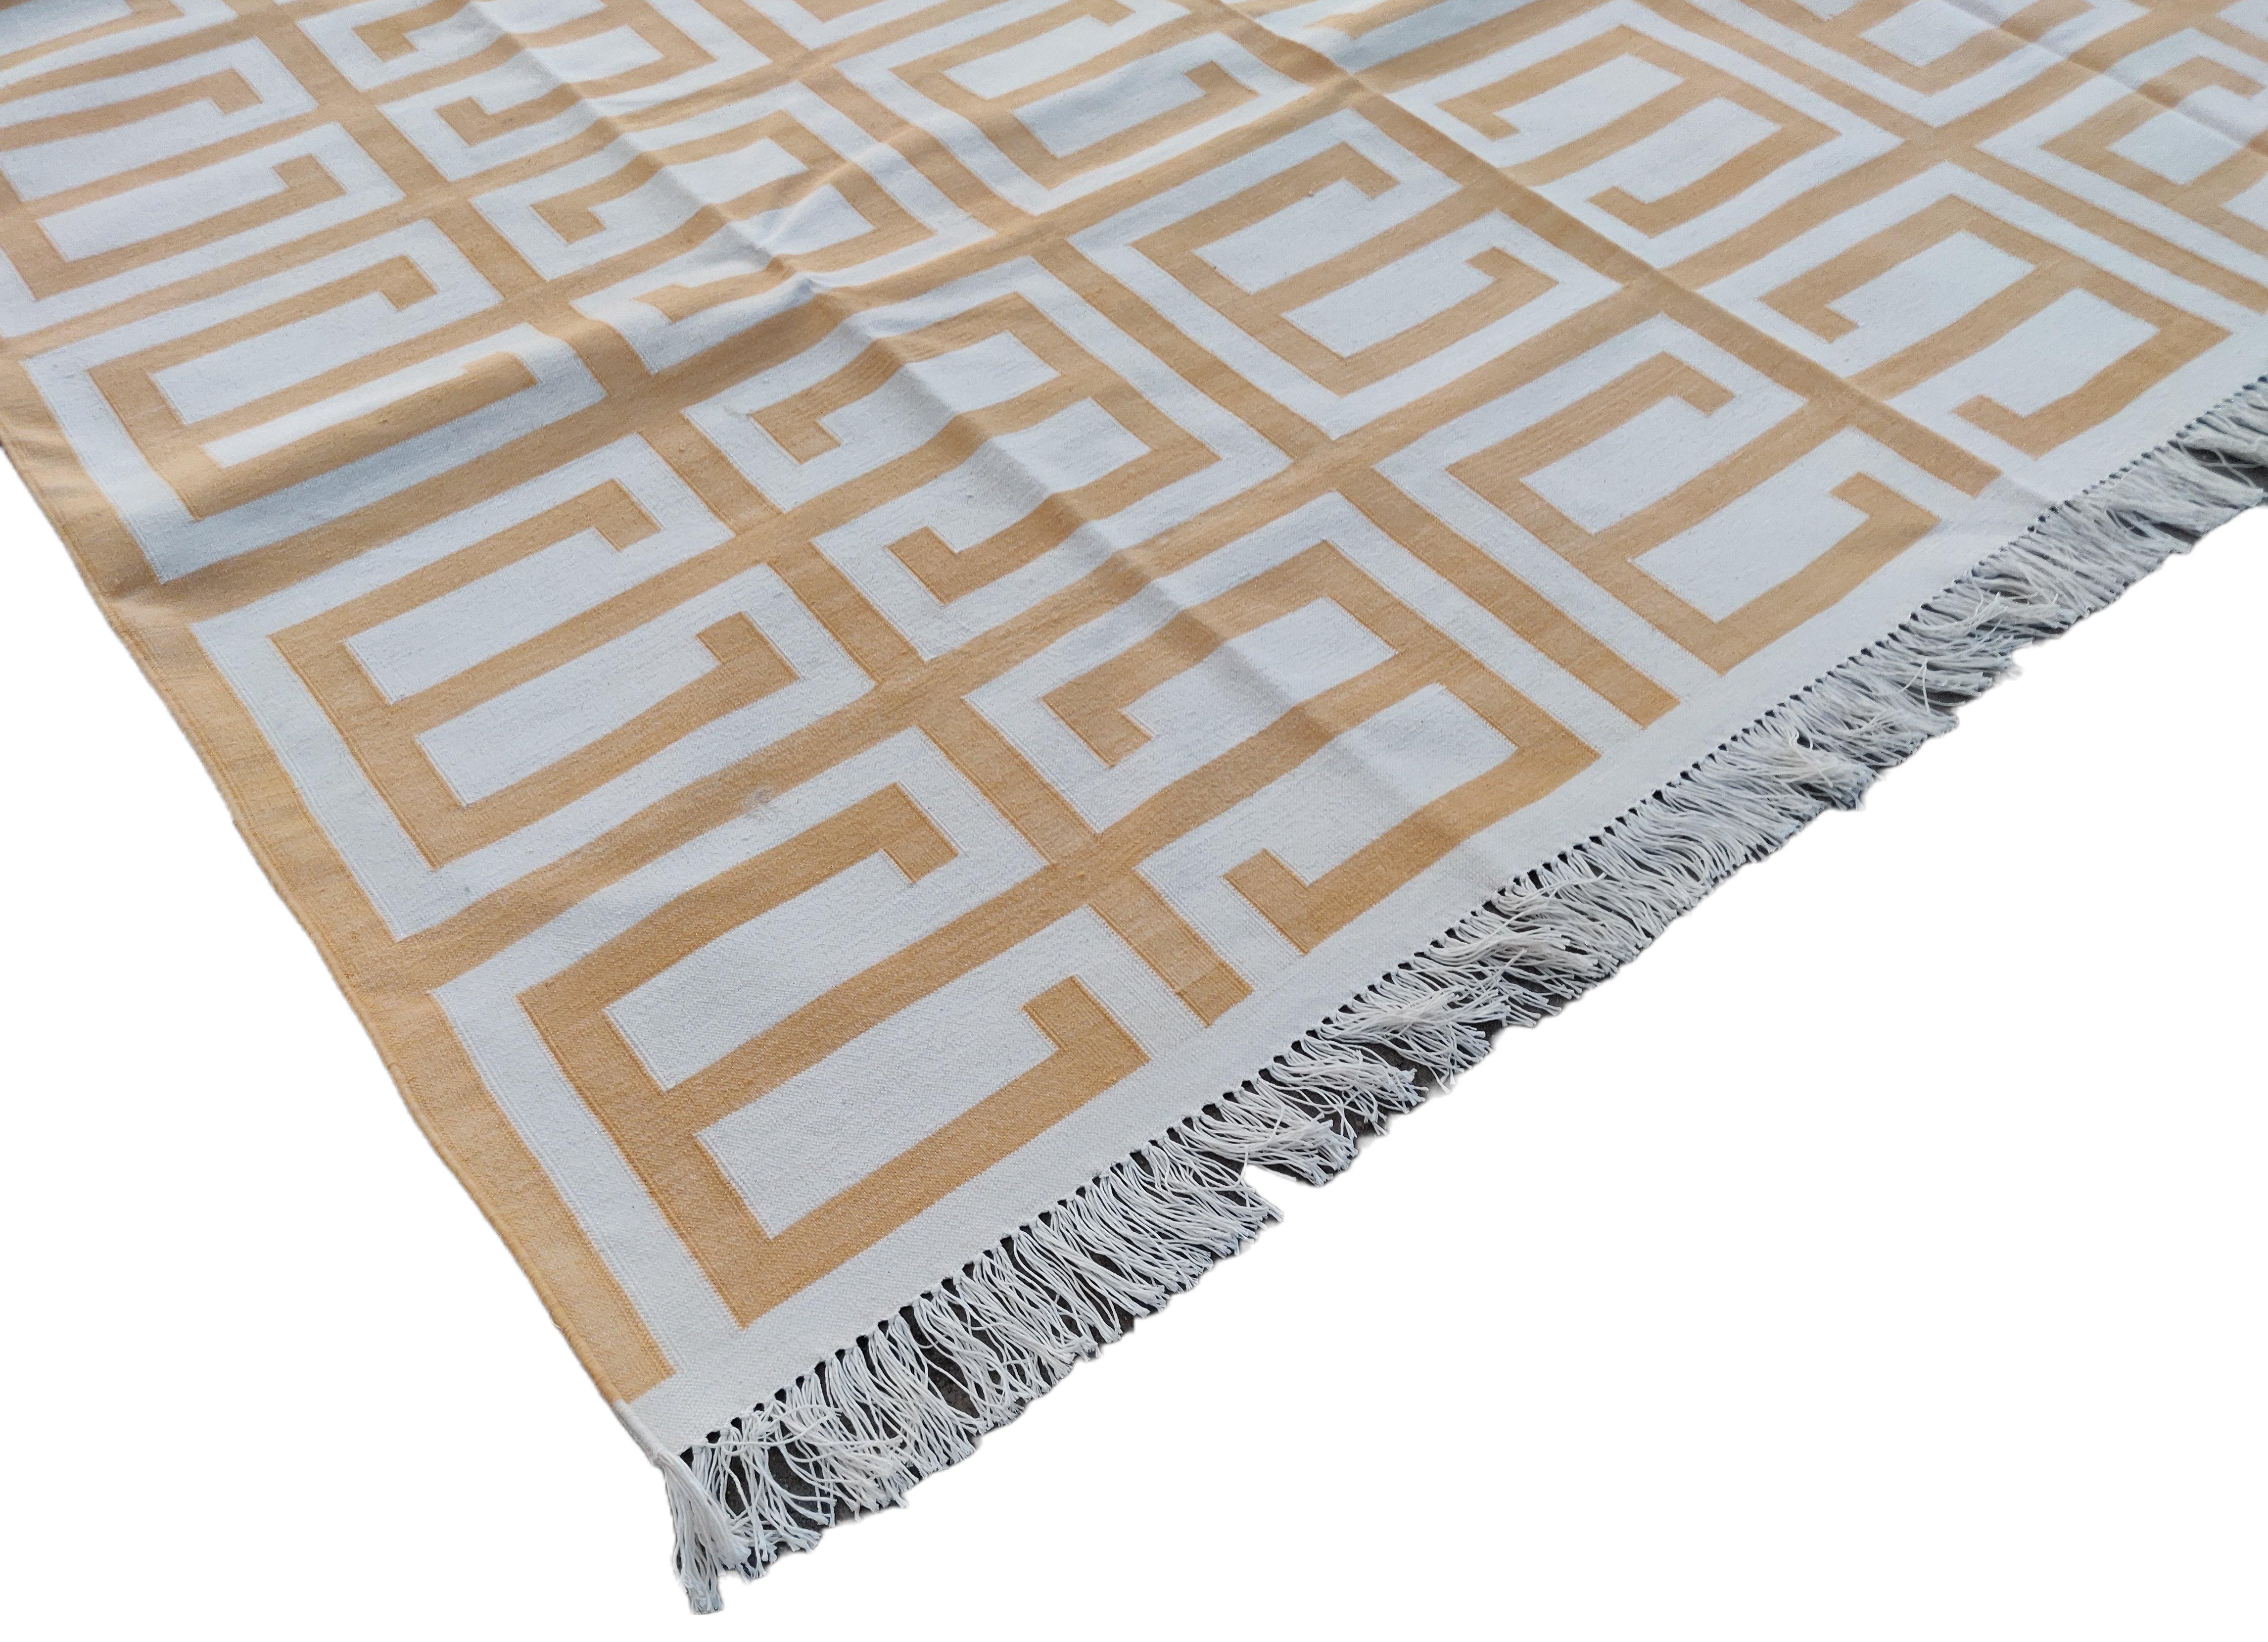 Contemporary Handmade Cotton Area Flat Weave Rug, 6x9 Yellow, White Geometric Indian Dhurrie For Sale